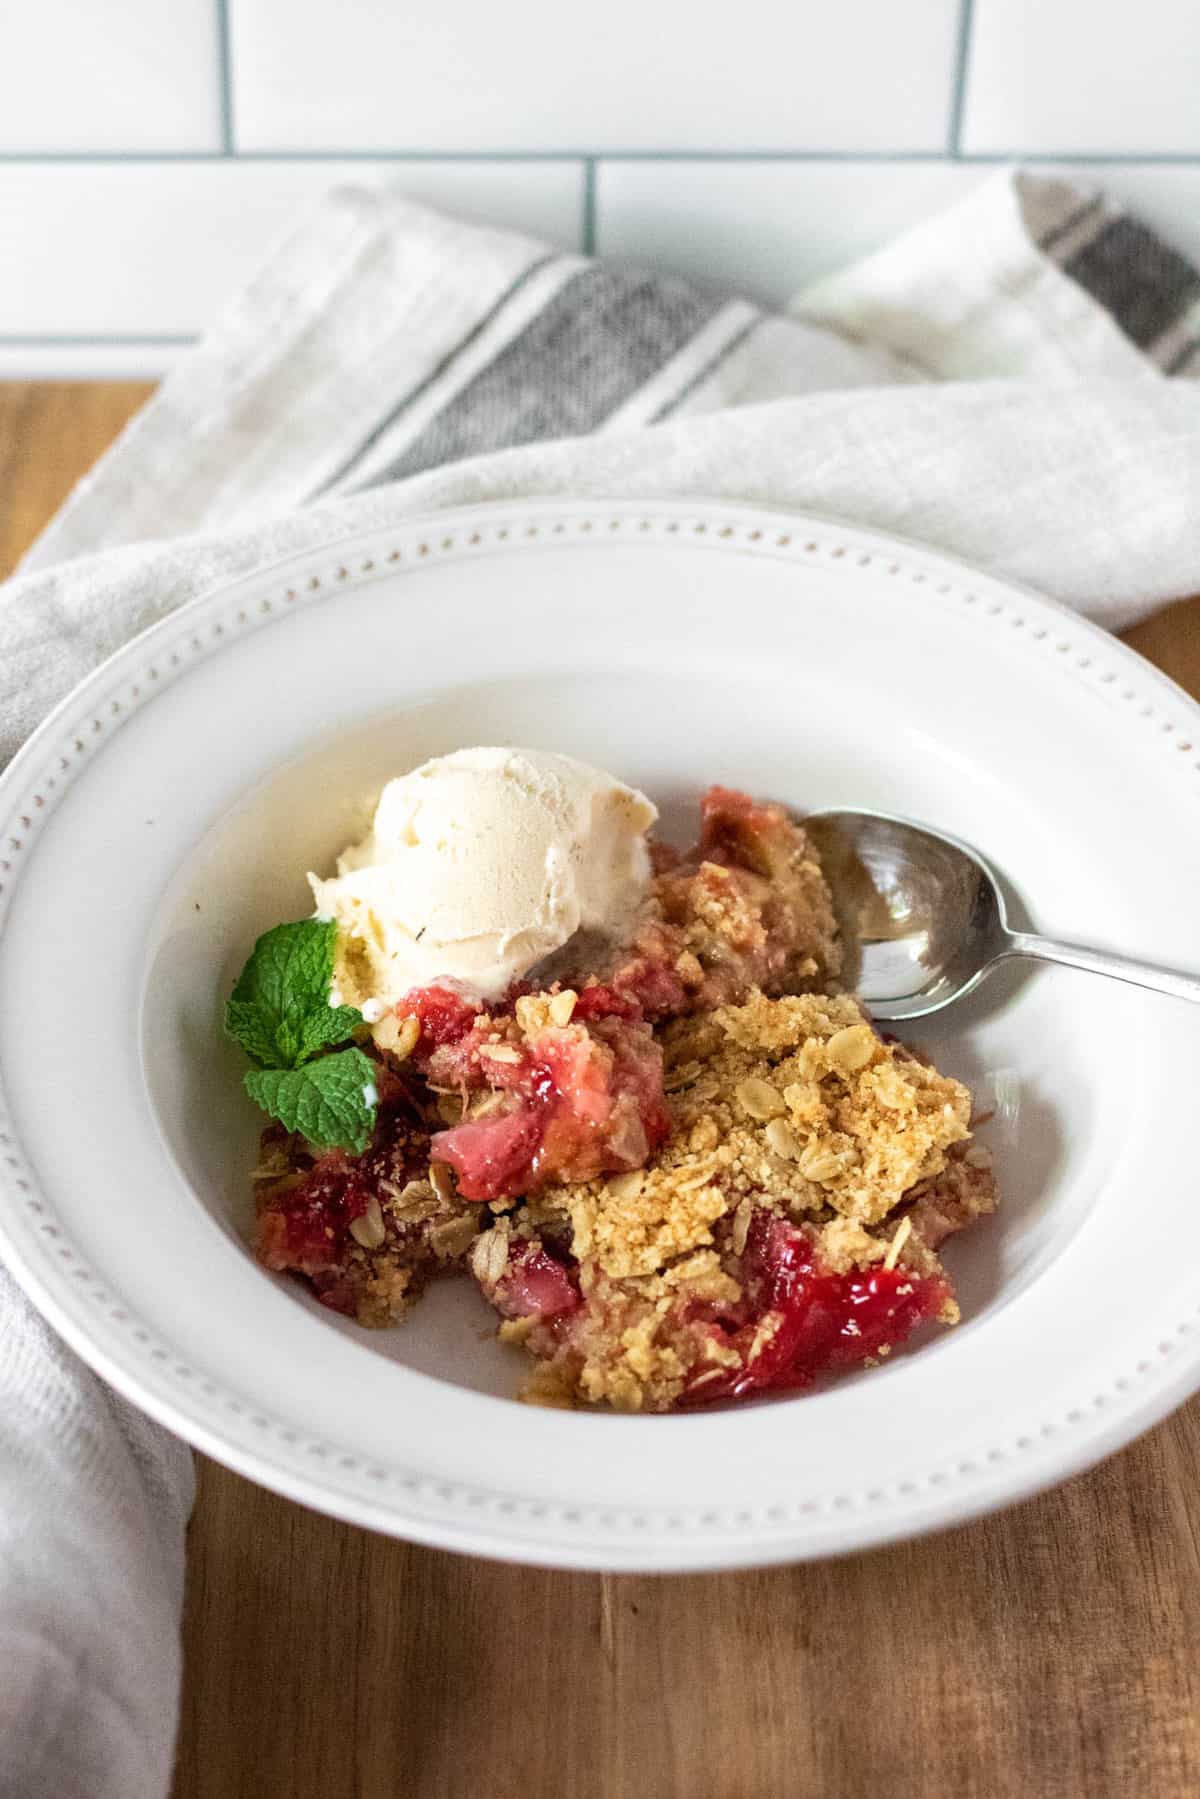 Strawberry rhubarb crisp in serving bowl with scoop of ice cream and spoon.